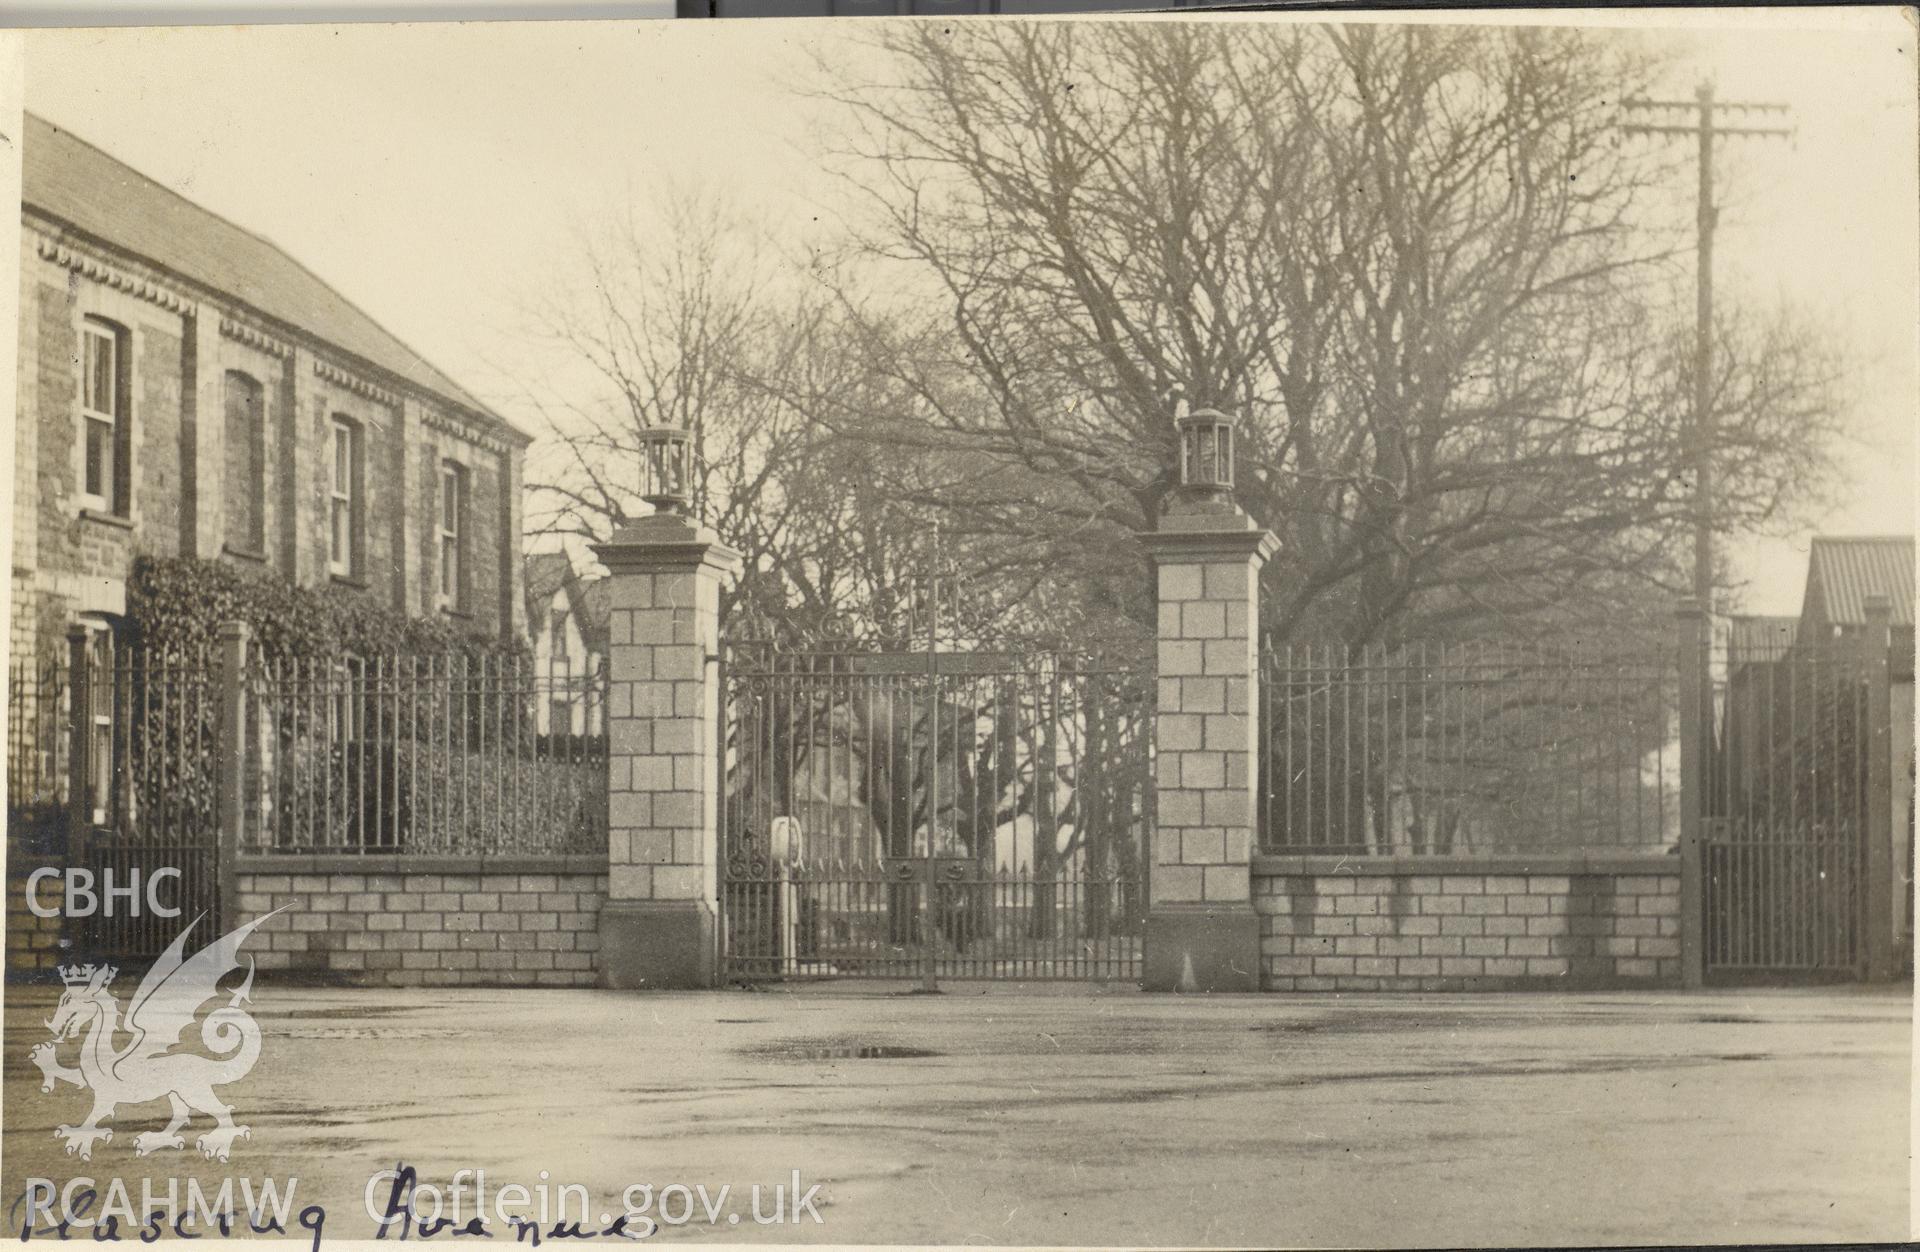 Digitised postcard image of Plascrug Avenue, Aberystwyth, including entrance gates. Produced by Parks and Gardens Data Services, from an original item in the Peter Davis Collection at Parks and Gardens UK. We hold only web-resolution images of this collection, suitable for viewing on screen and for research purposes only. We do not hold the original images, or publication quality scans.